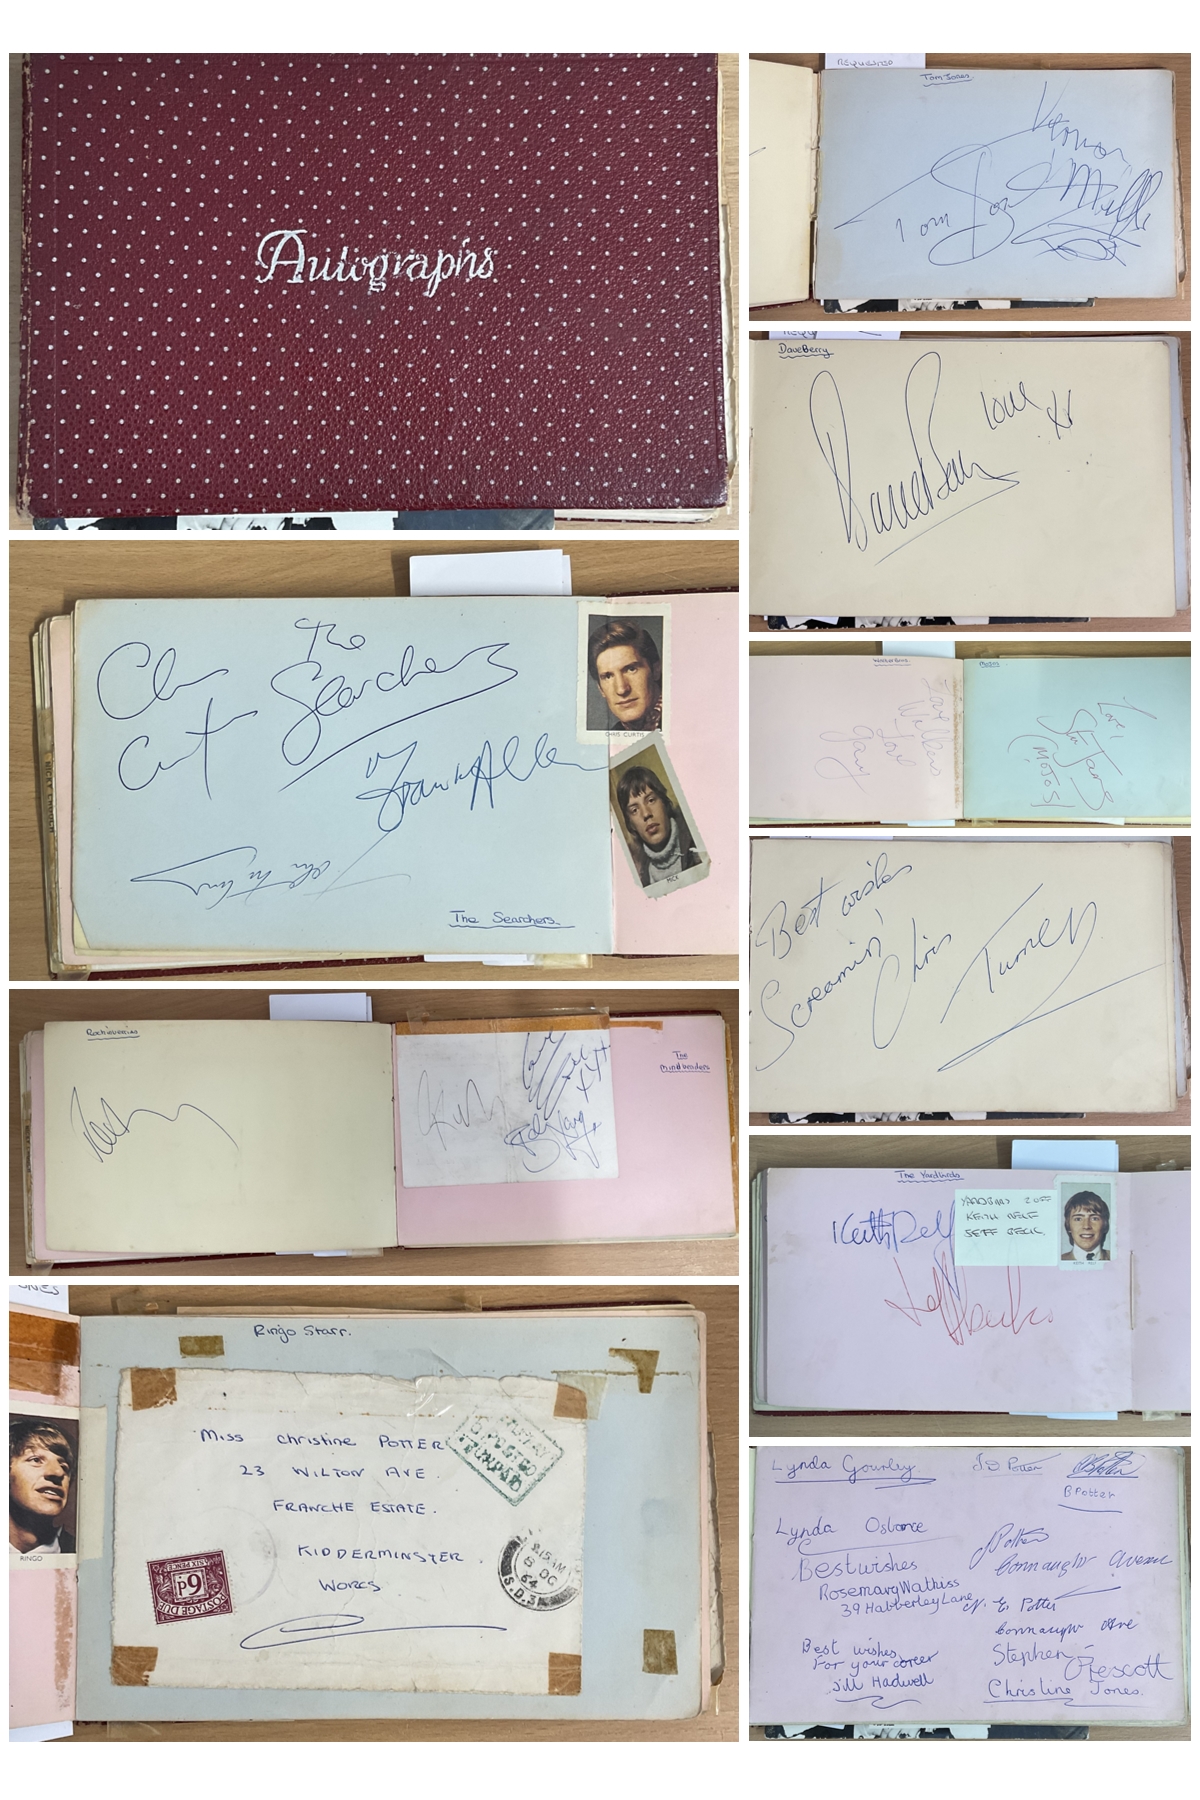 Entertainment collection Autograph book includes some great signatures such as Ringo Starr, Tom